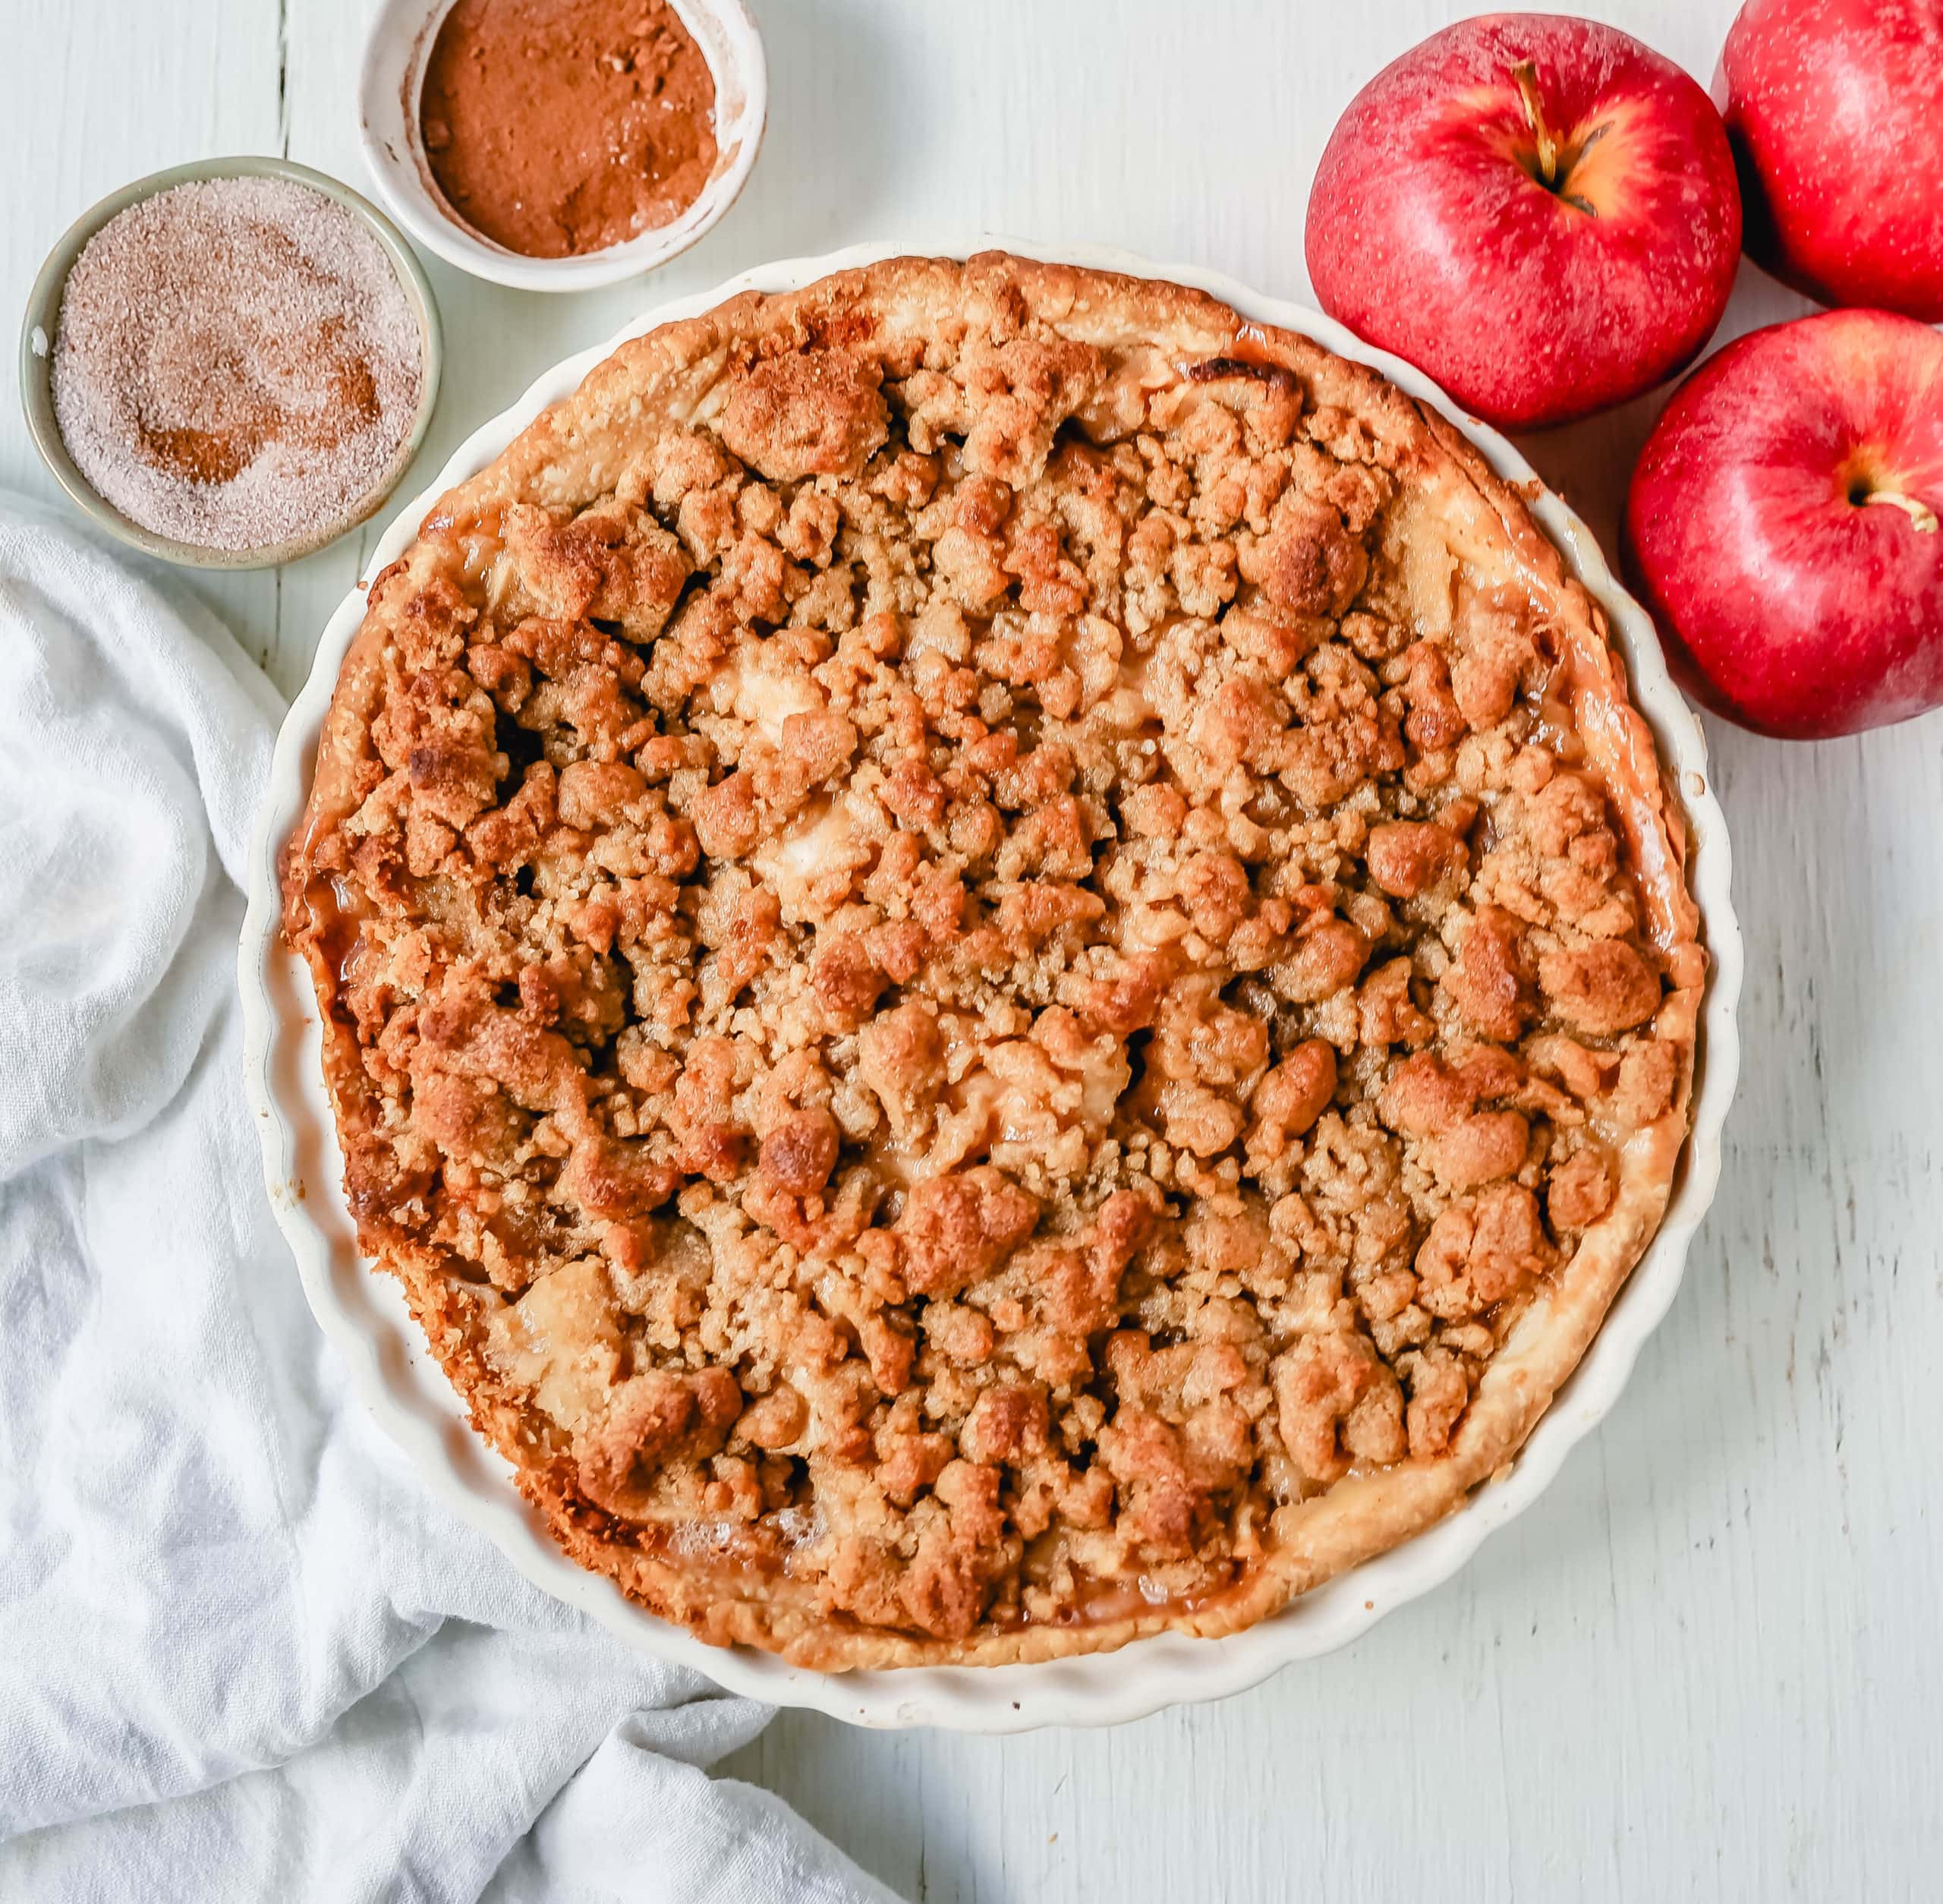 Dutch Apple Pie How to make a traditional Dutch Apple Pie with a buttery, flaky pie crust, topped with cinnamon-sugar apples, with a brown sugar streusel topping.  www.modernhoney.com #apple #applepie #dutchapplepie